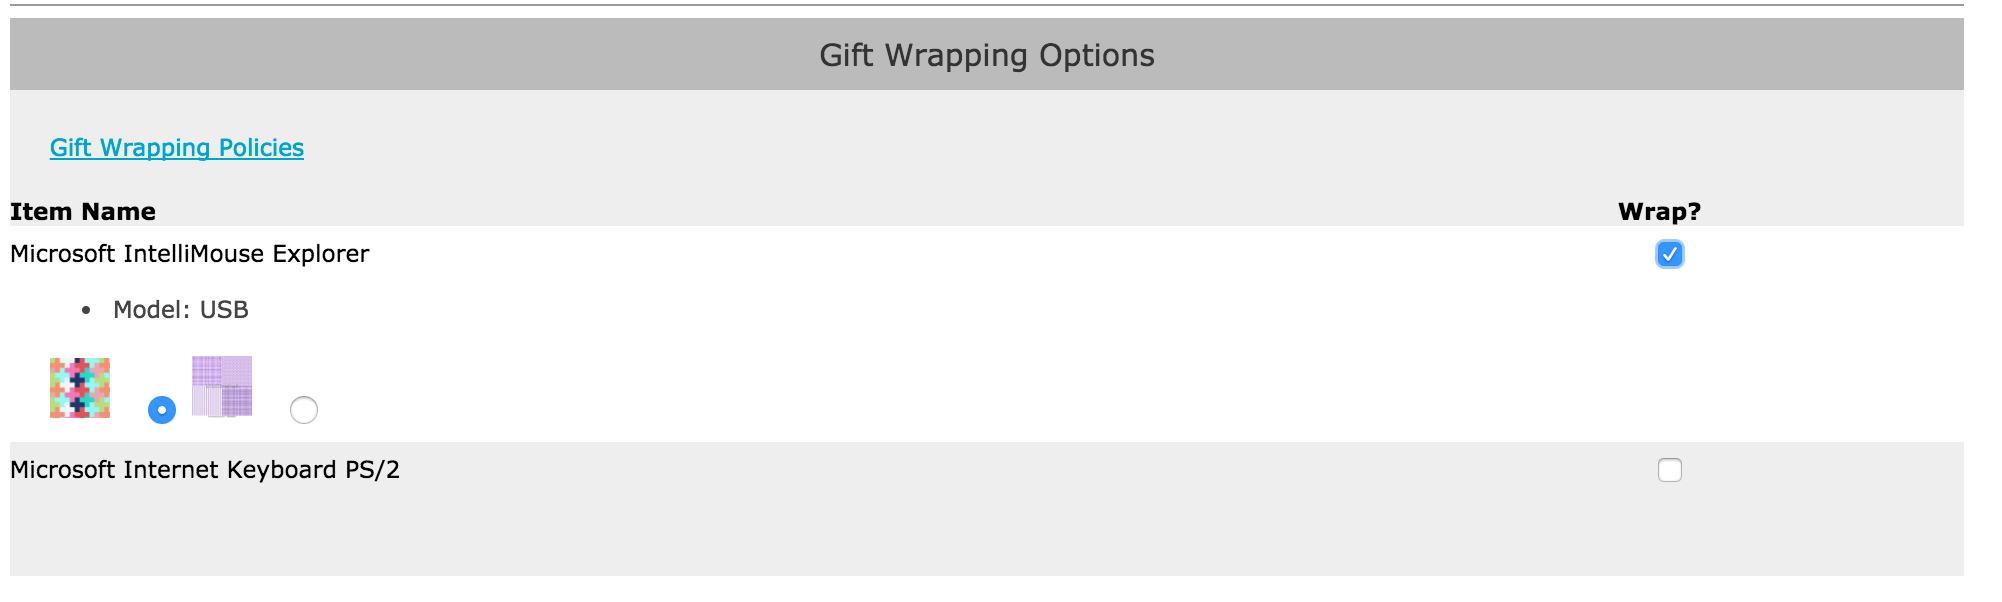 Zen Cart Shipping page image descriptions of wrap styles